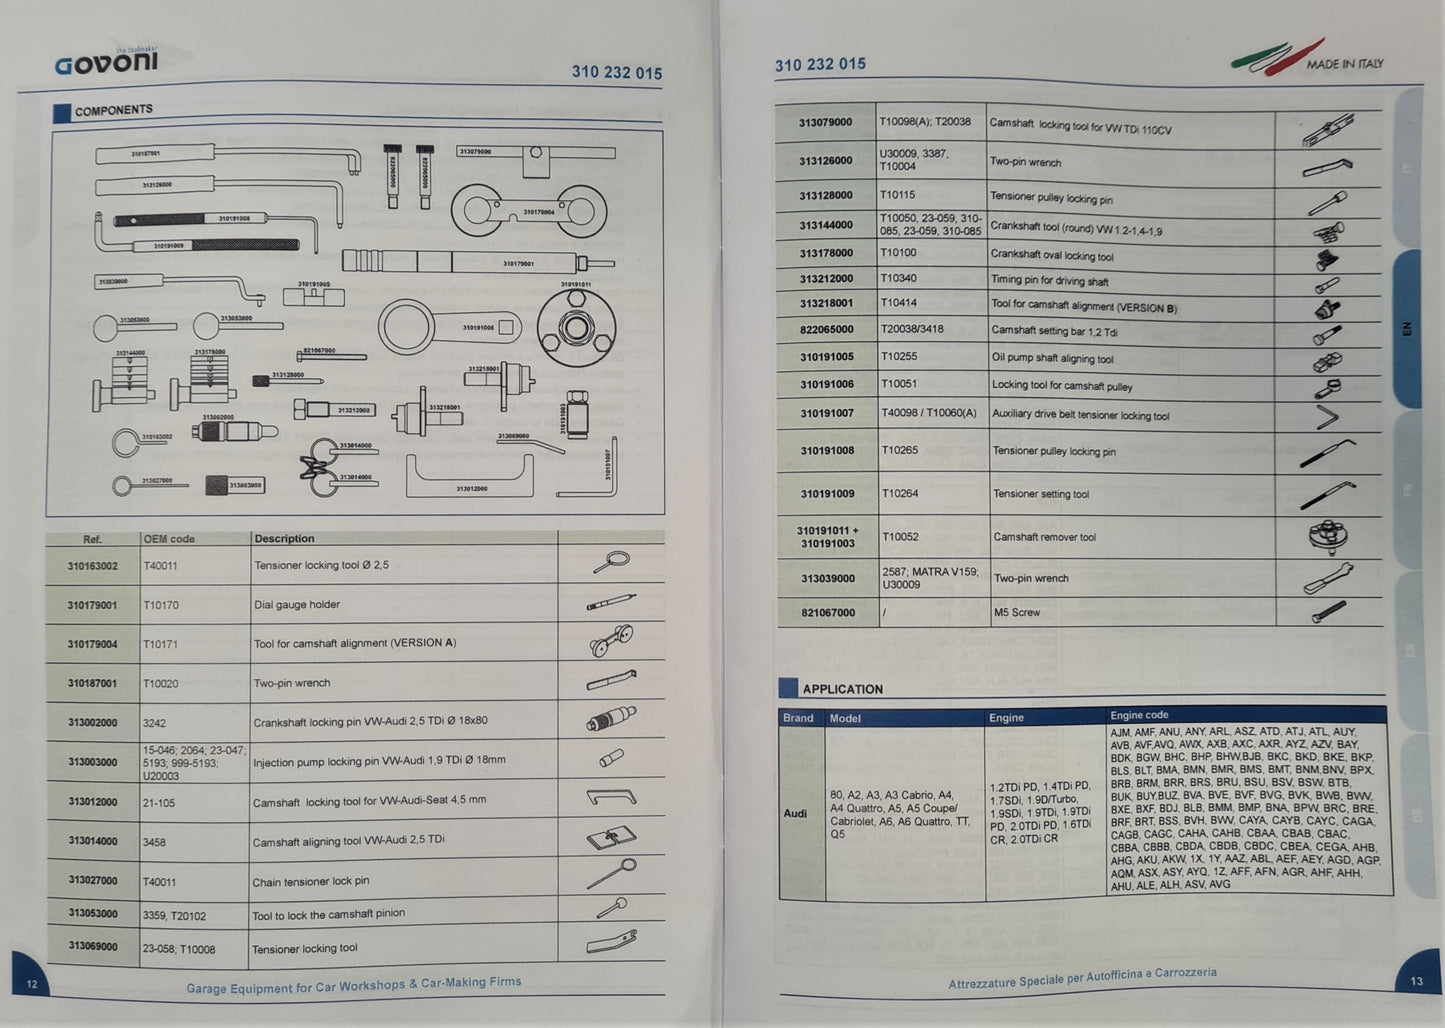 Govoni VW Group Diesel Timing Set Tool descriptions and applications